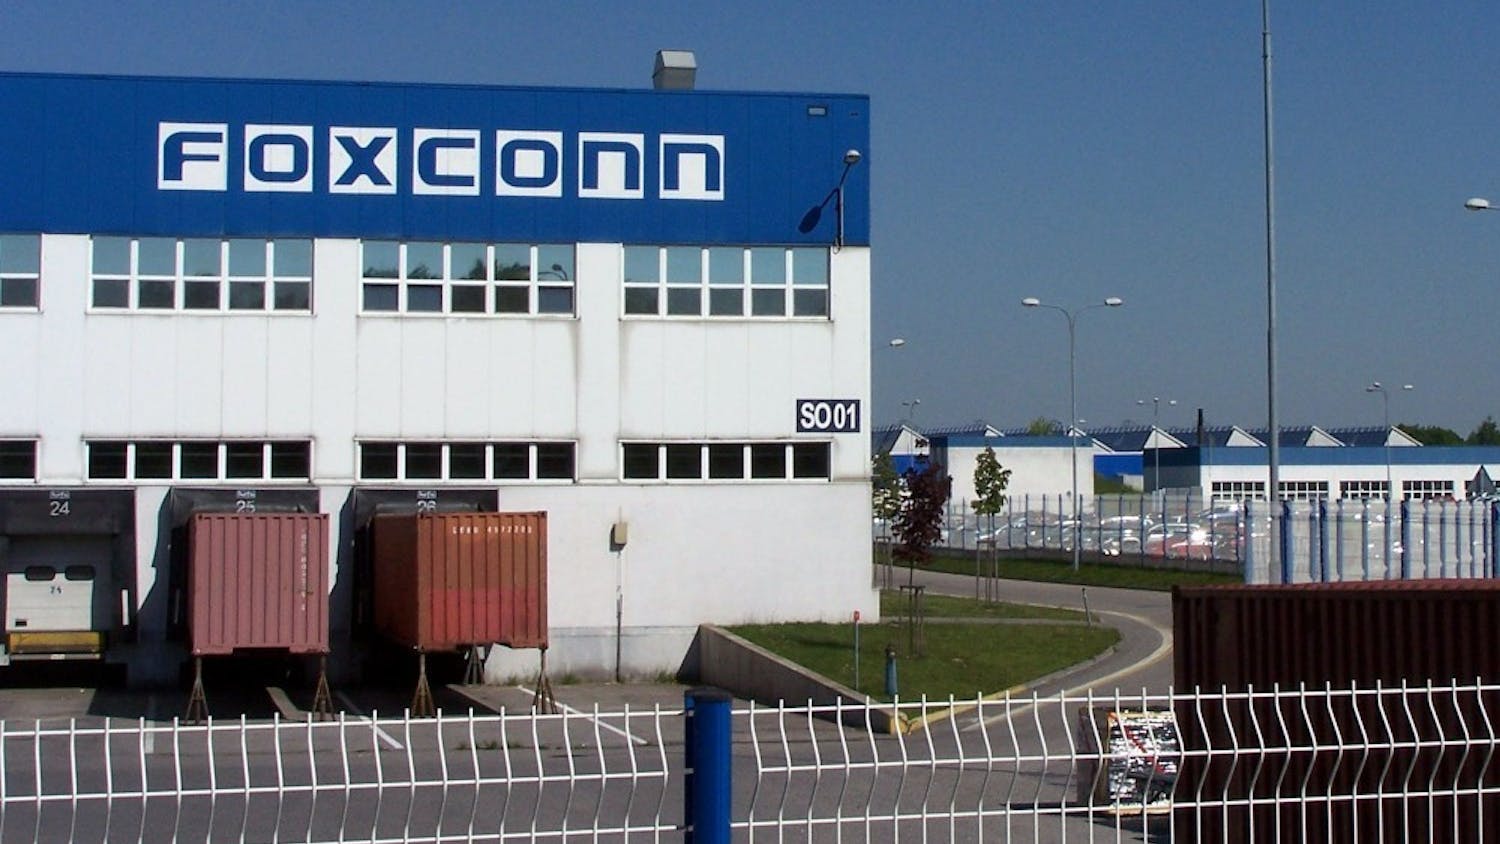 Photo of a Foxconn building.